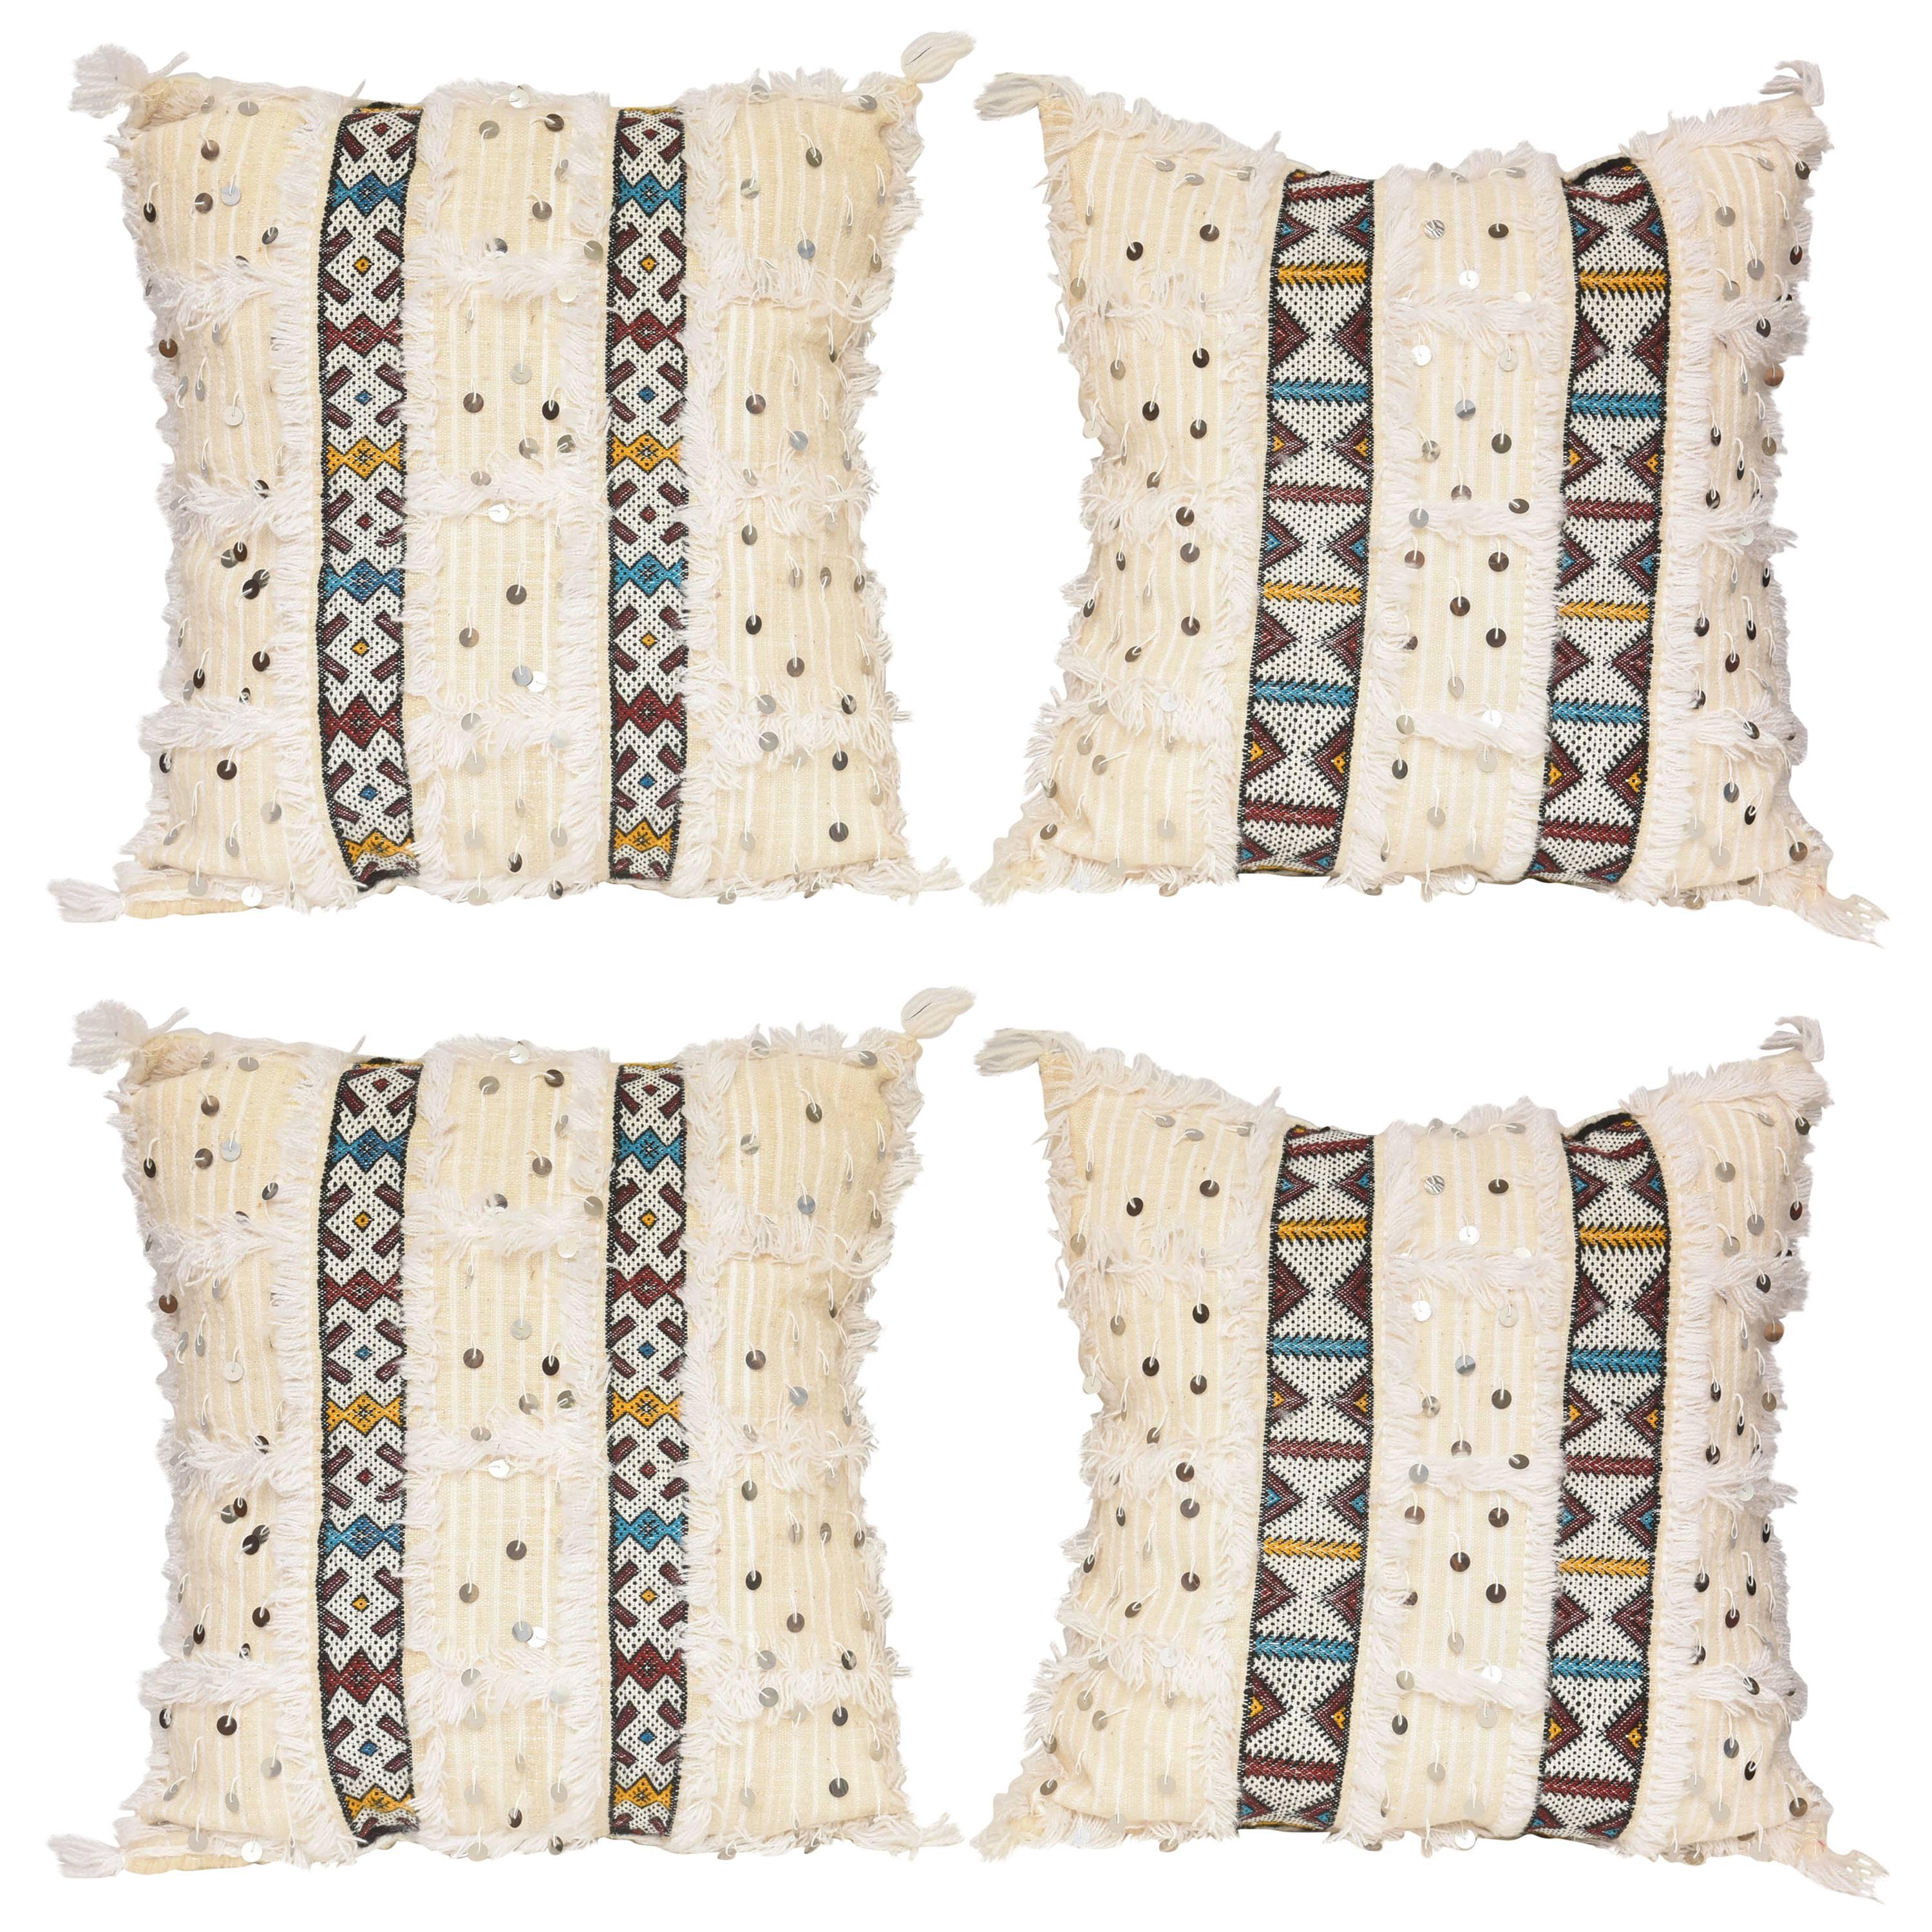 Two Pairs of White Morrocan Pillows